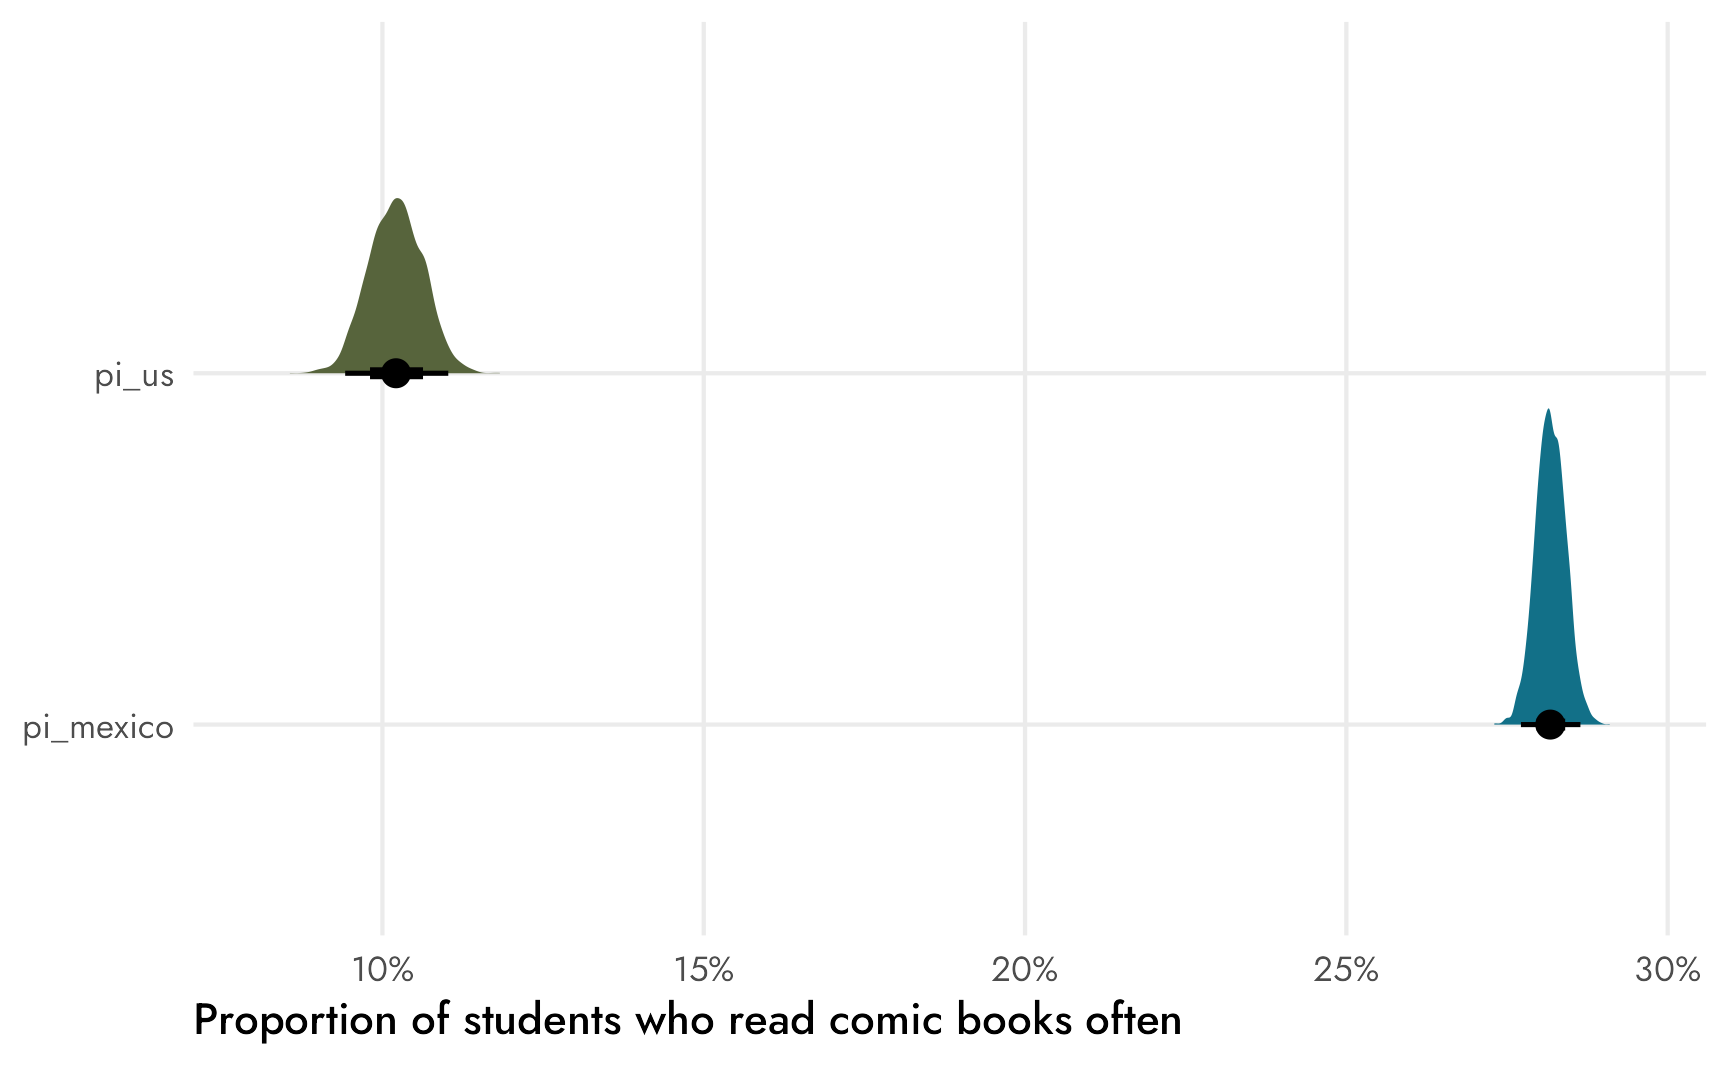 Posterior distributions of the proportion of students who read comic books often in the United States and Mexico